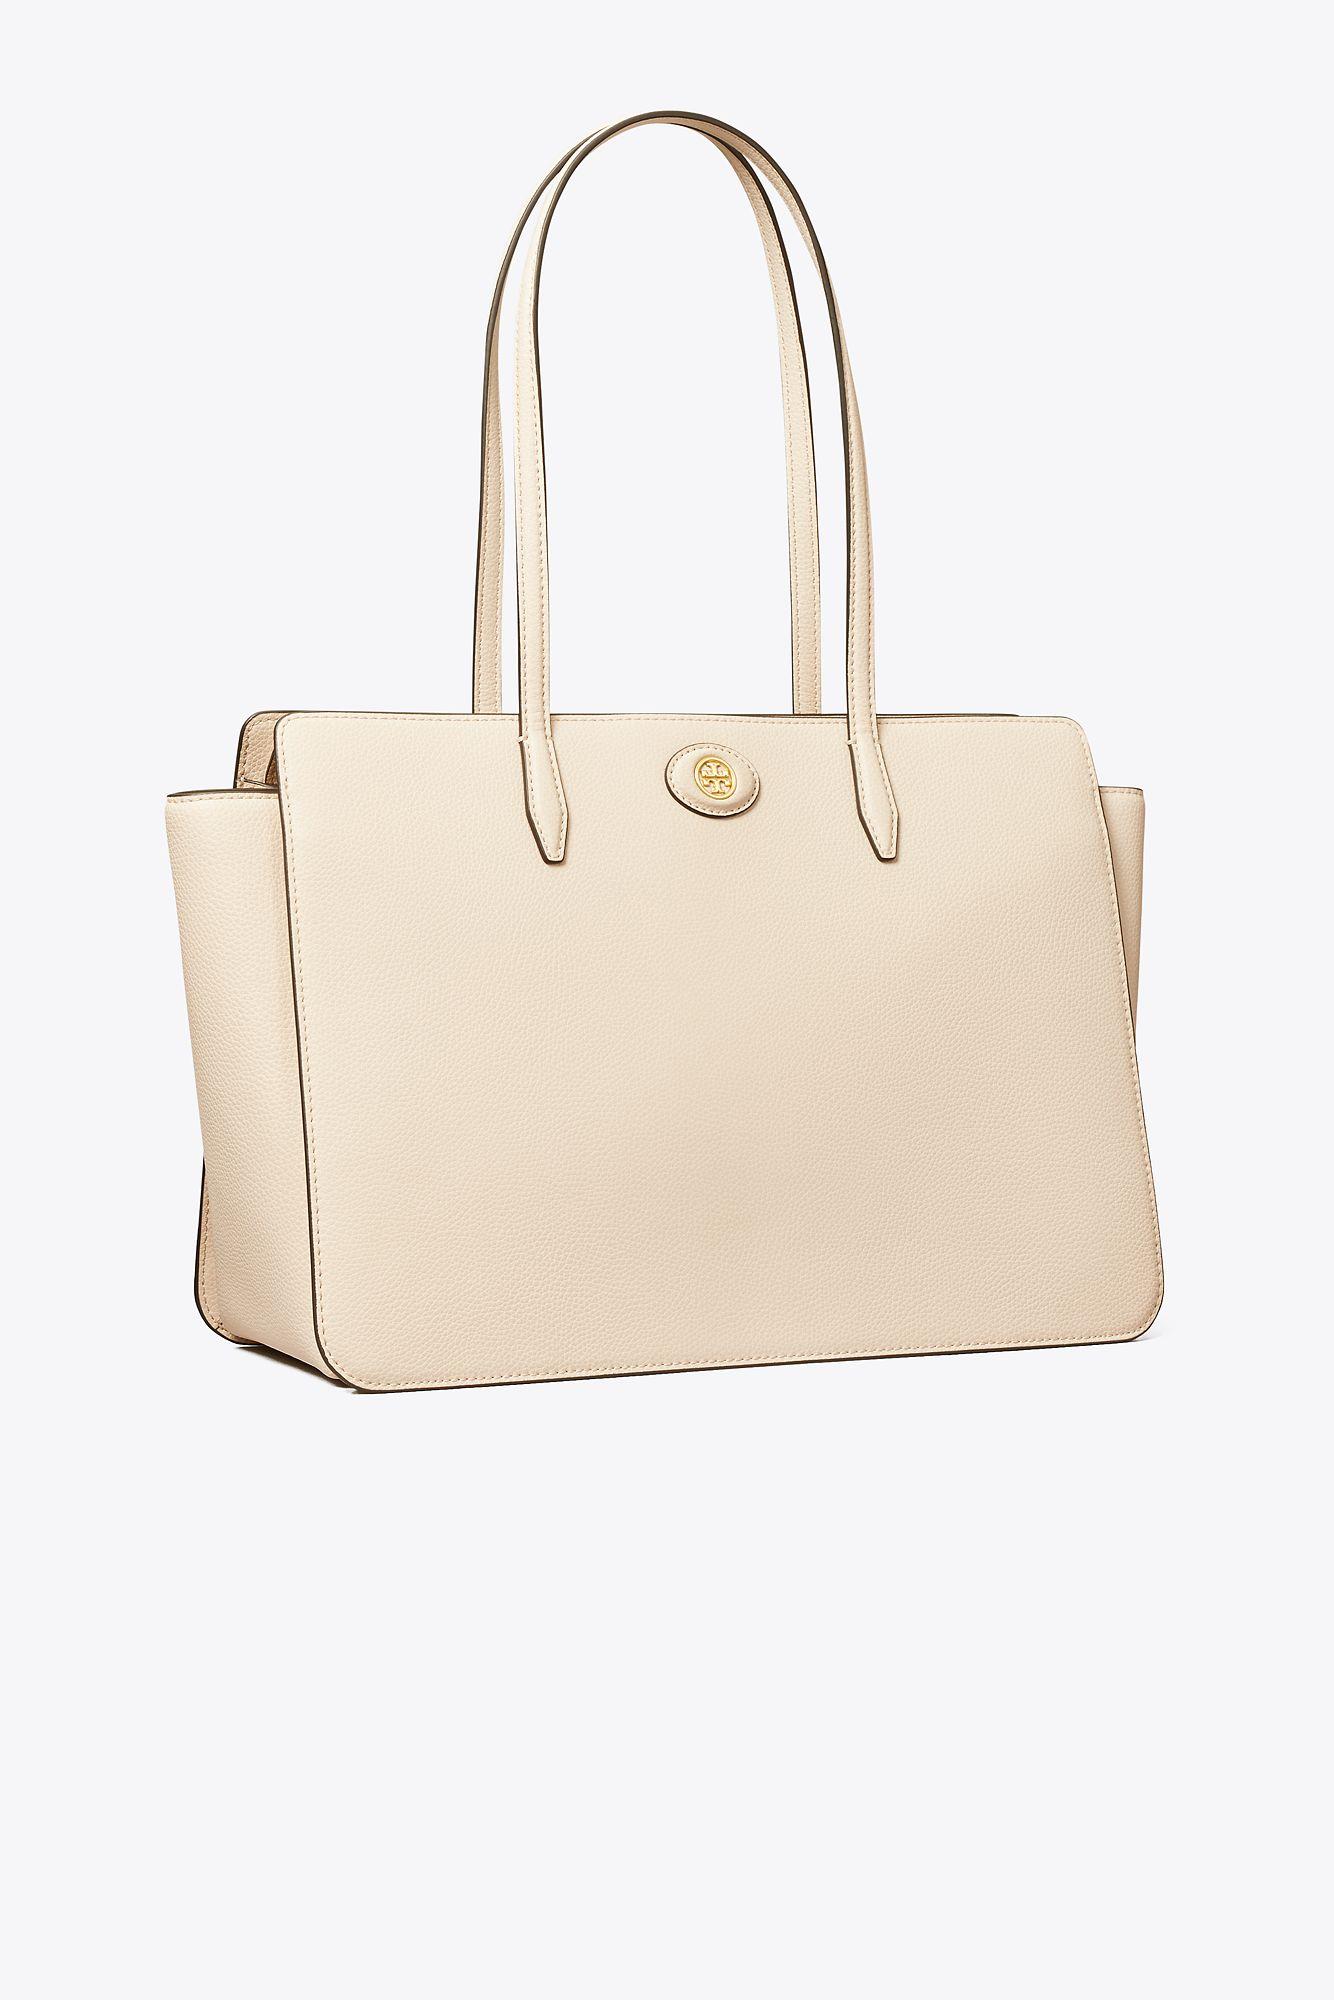 Tory Burch Robinson Pebbled Tote in Natural | Lyst